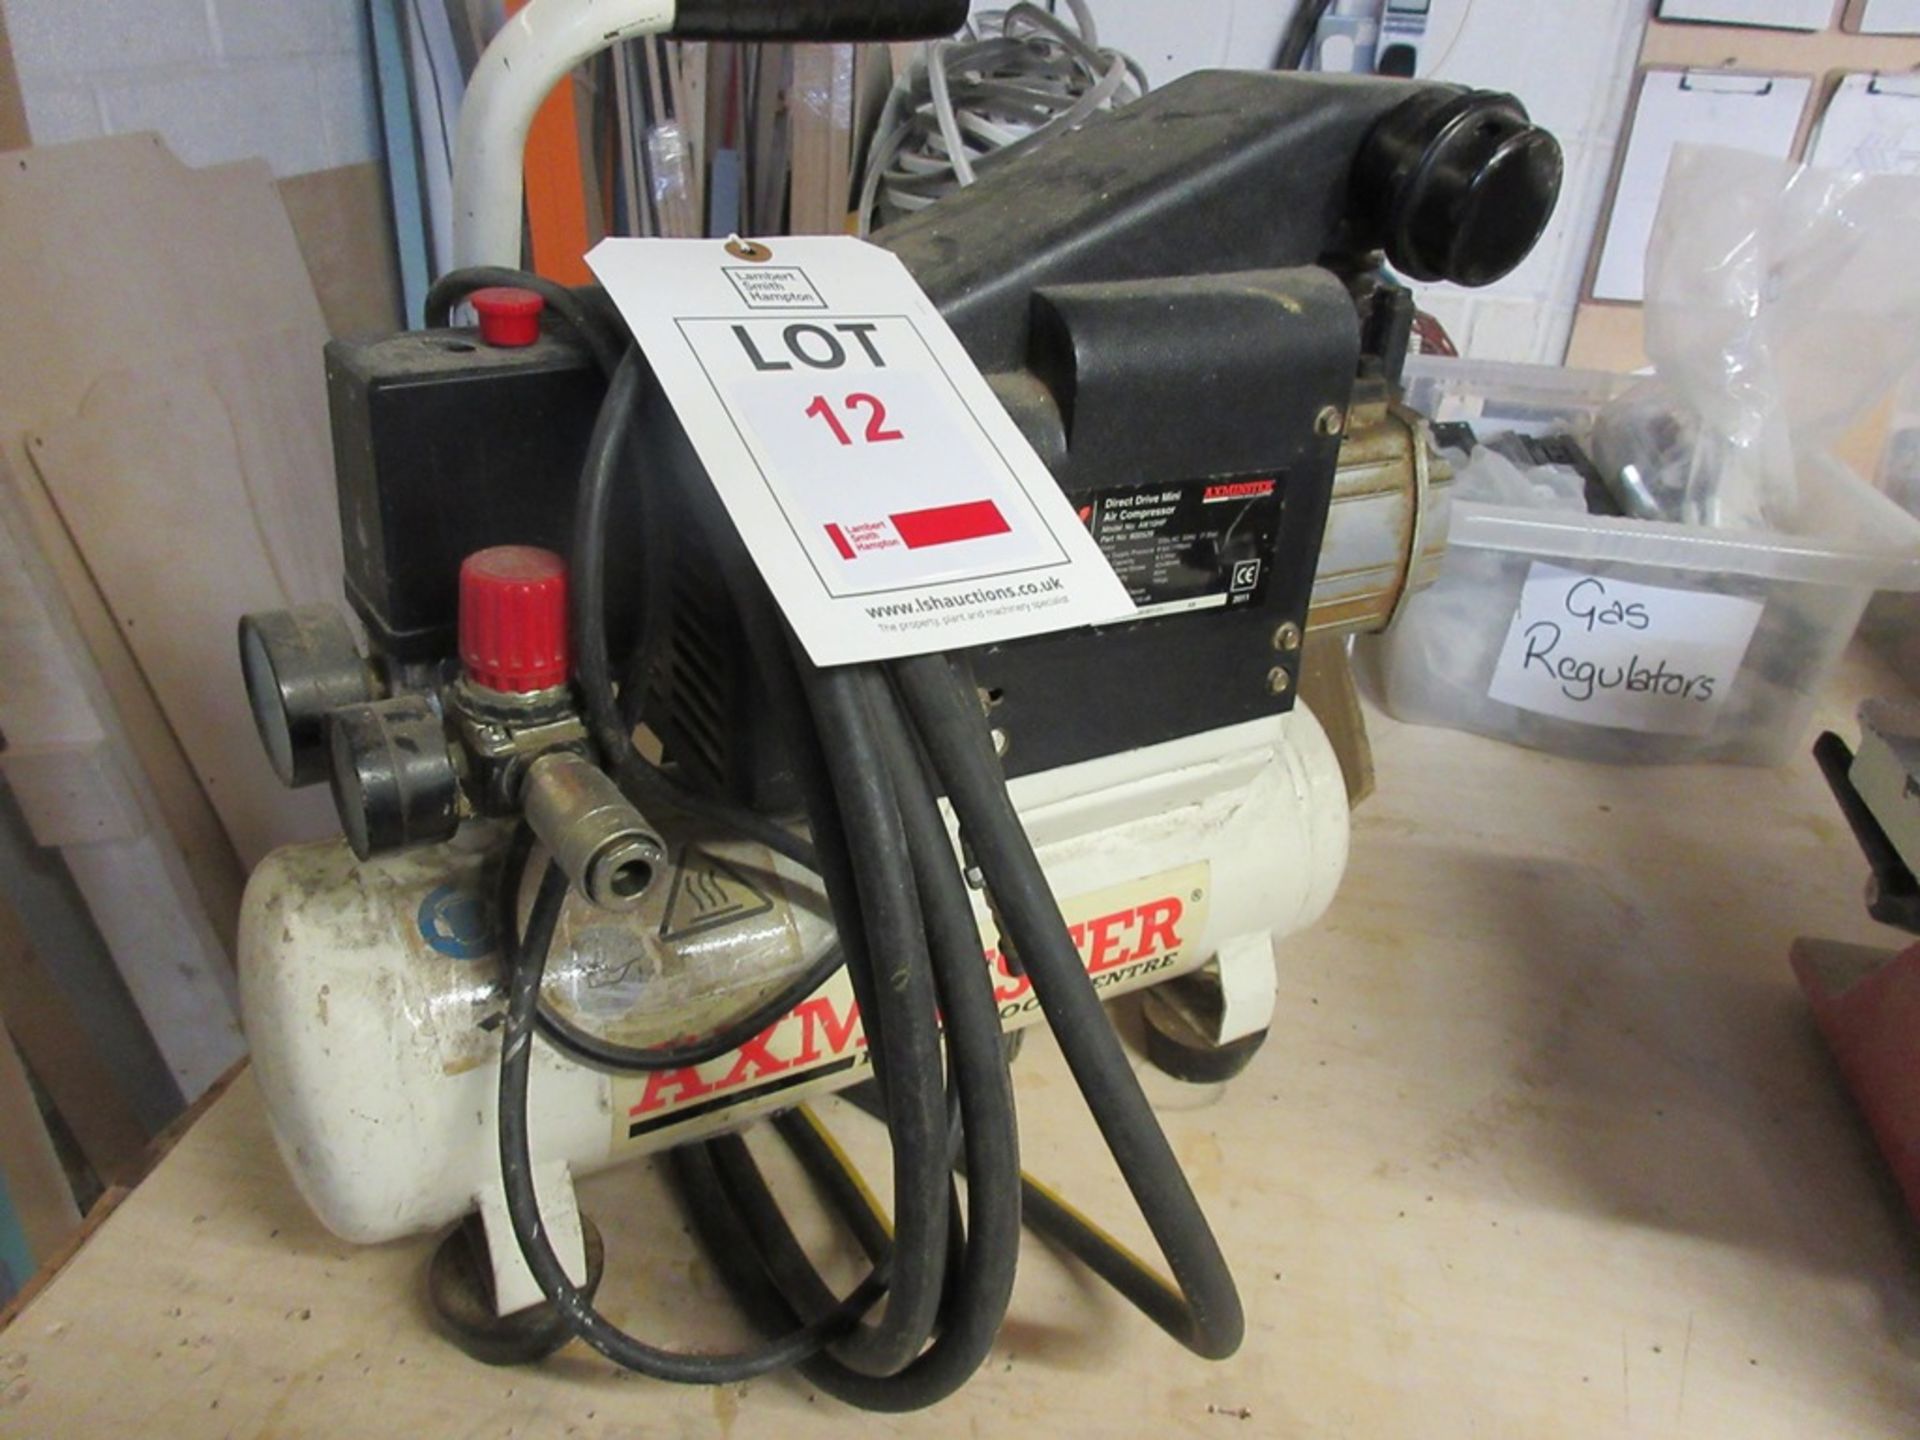 Axminster AW10HP portable direct drive air compressor, 6 litre, serial number: 2011AM-007-01 (2011),